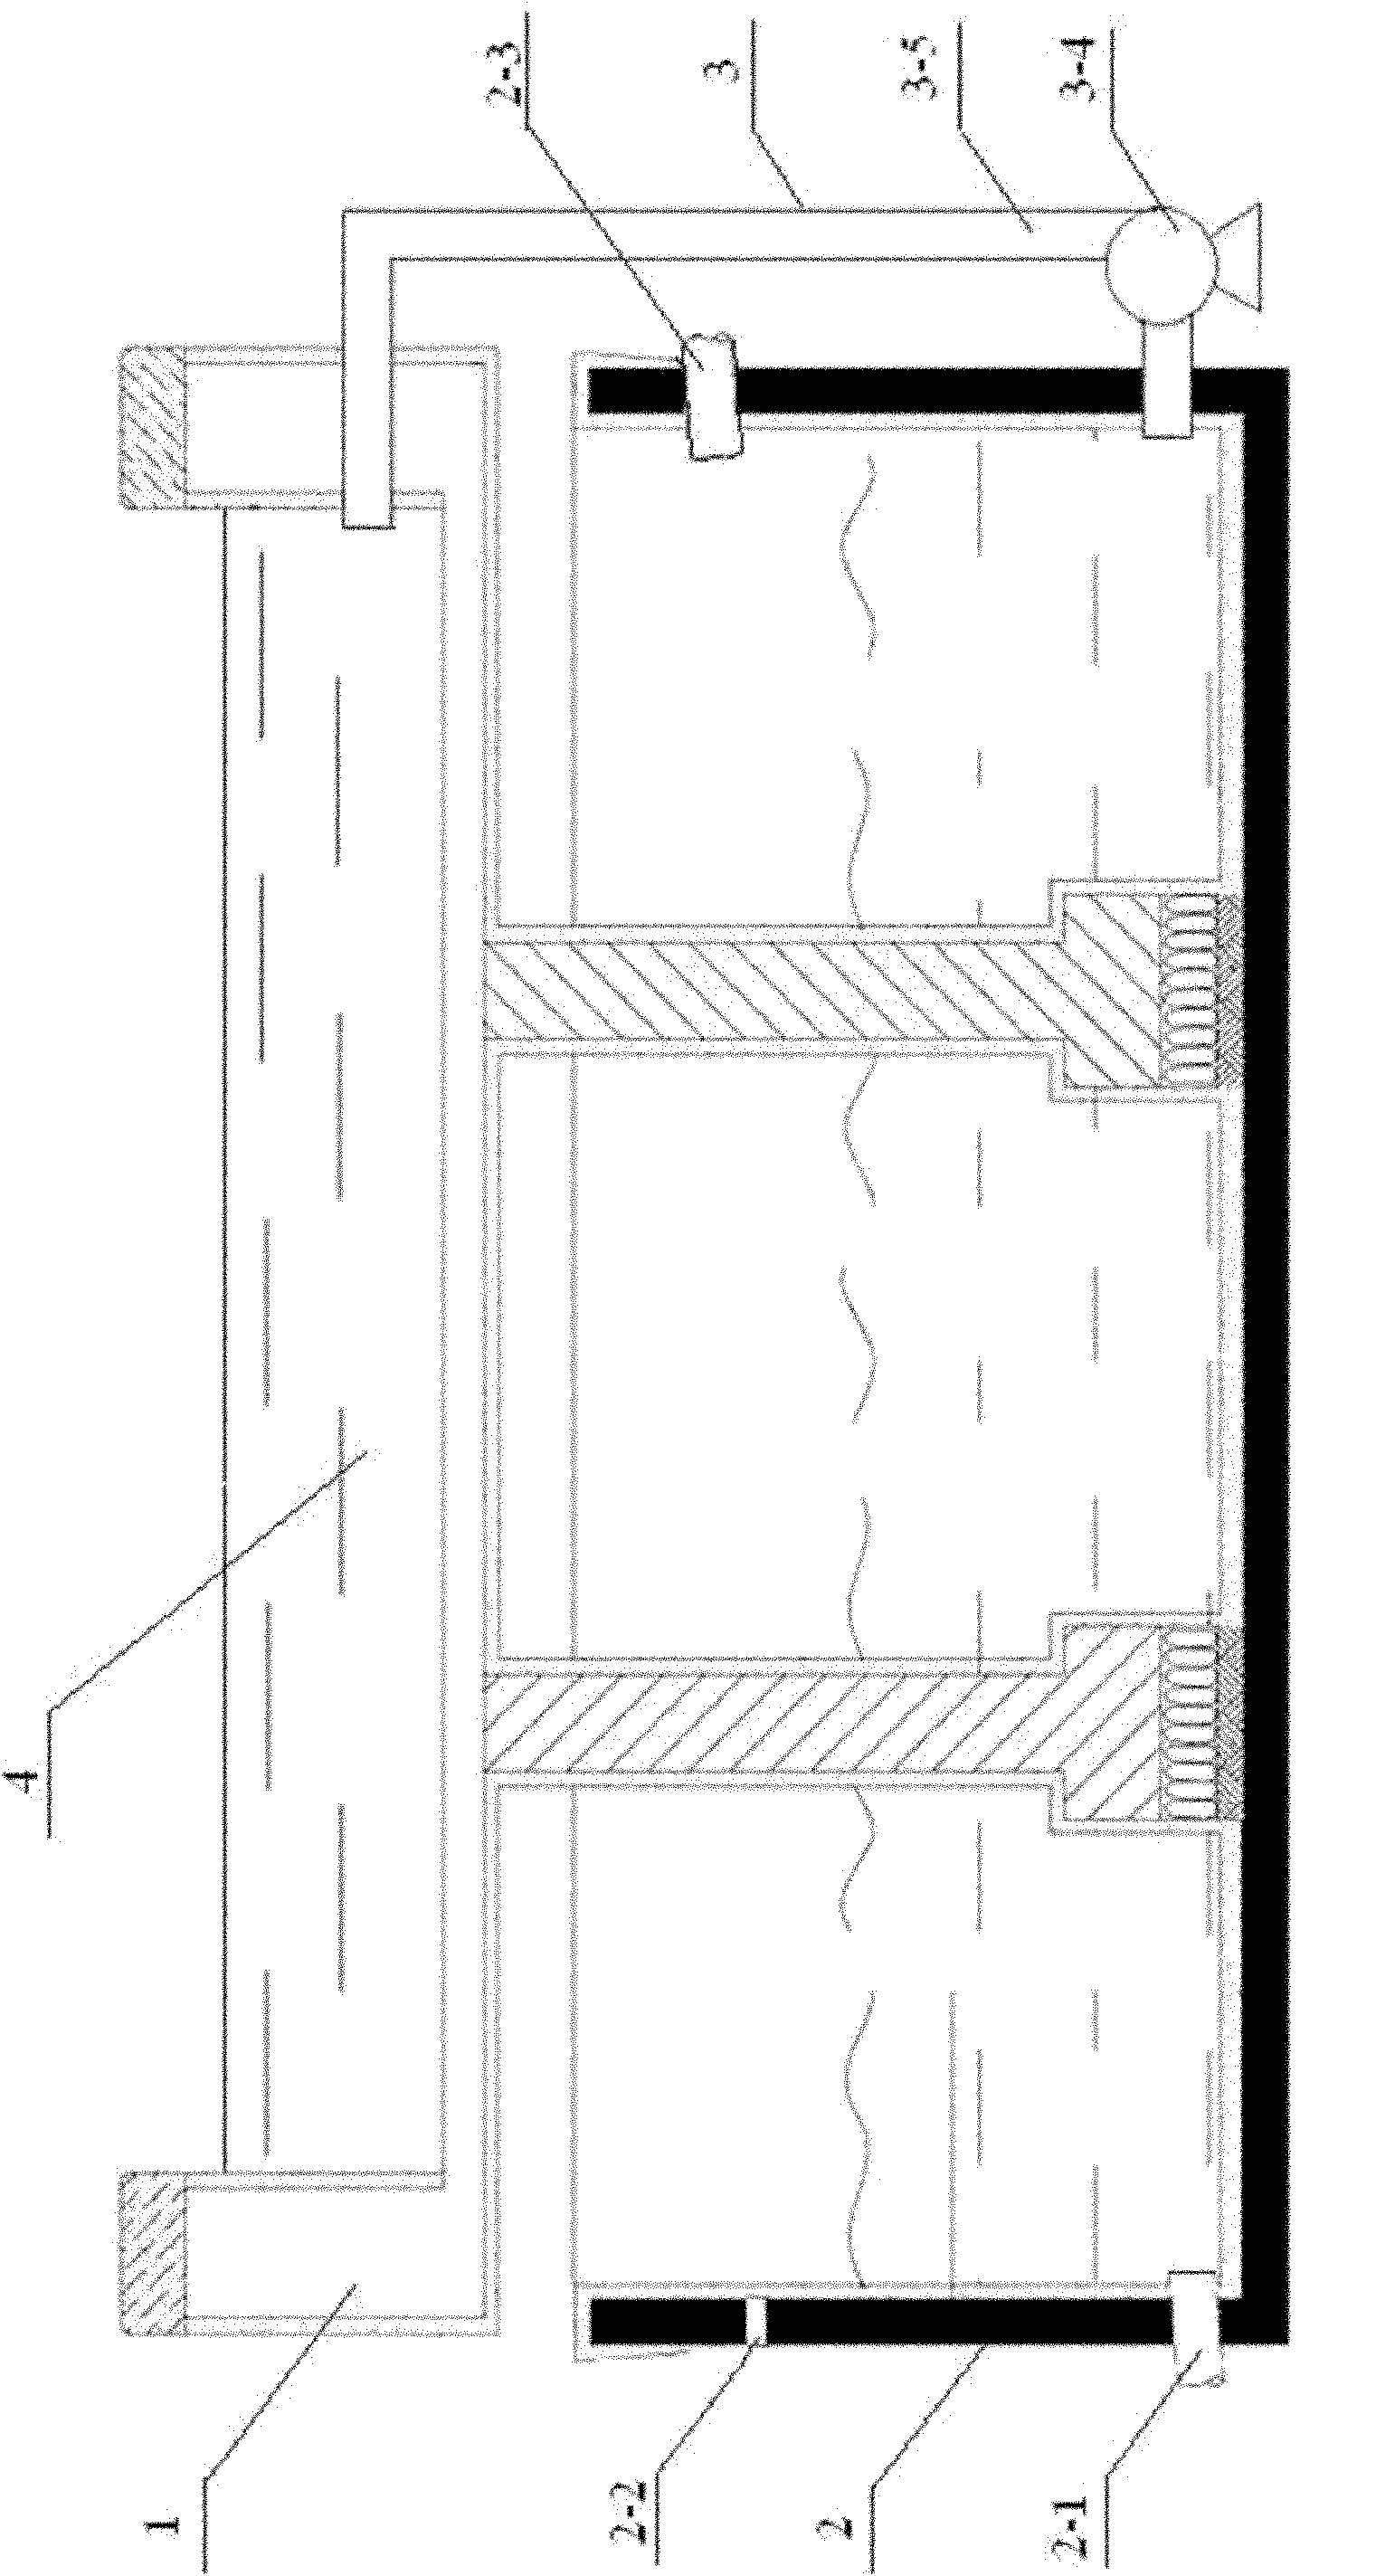 Three-dimensional landscape impounding reservoir system and method for recovering urban roofing rainwater by using same